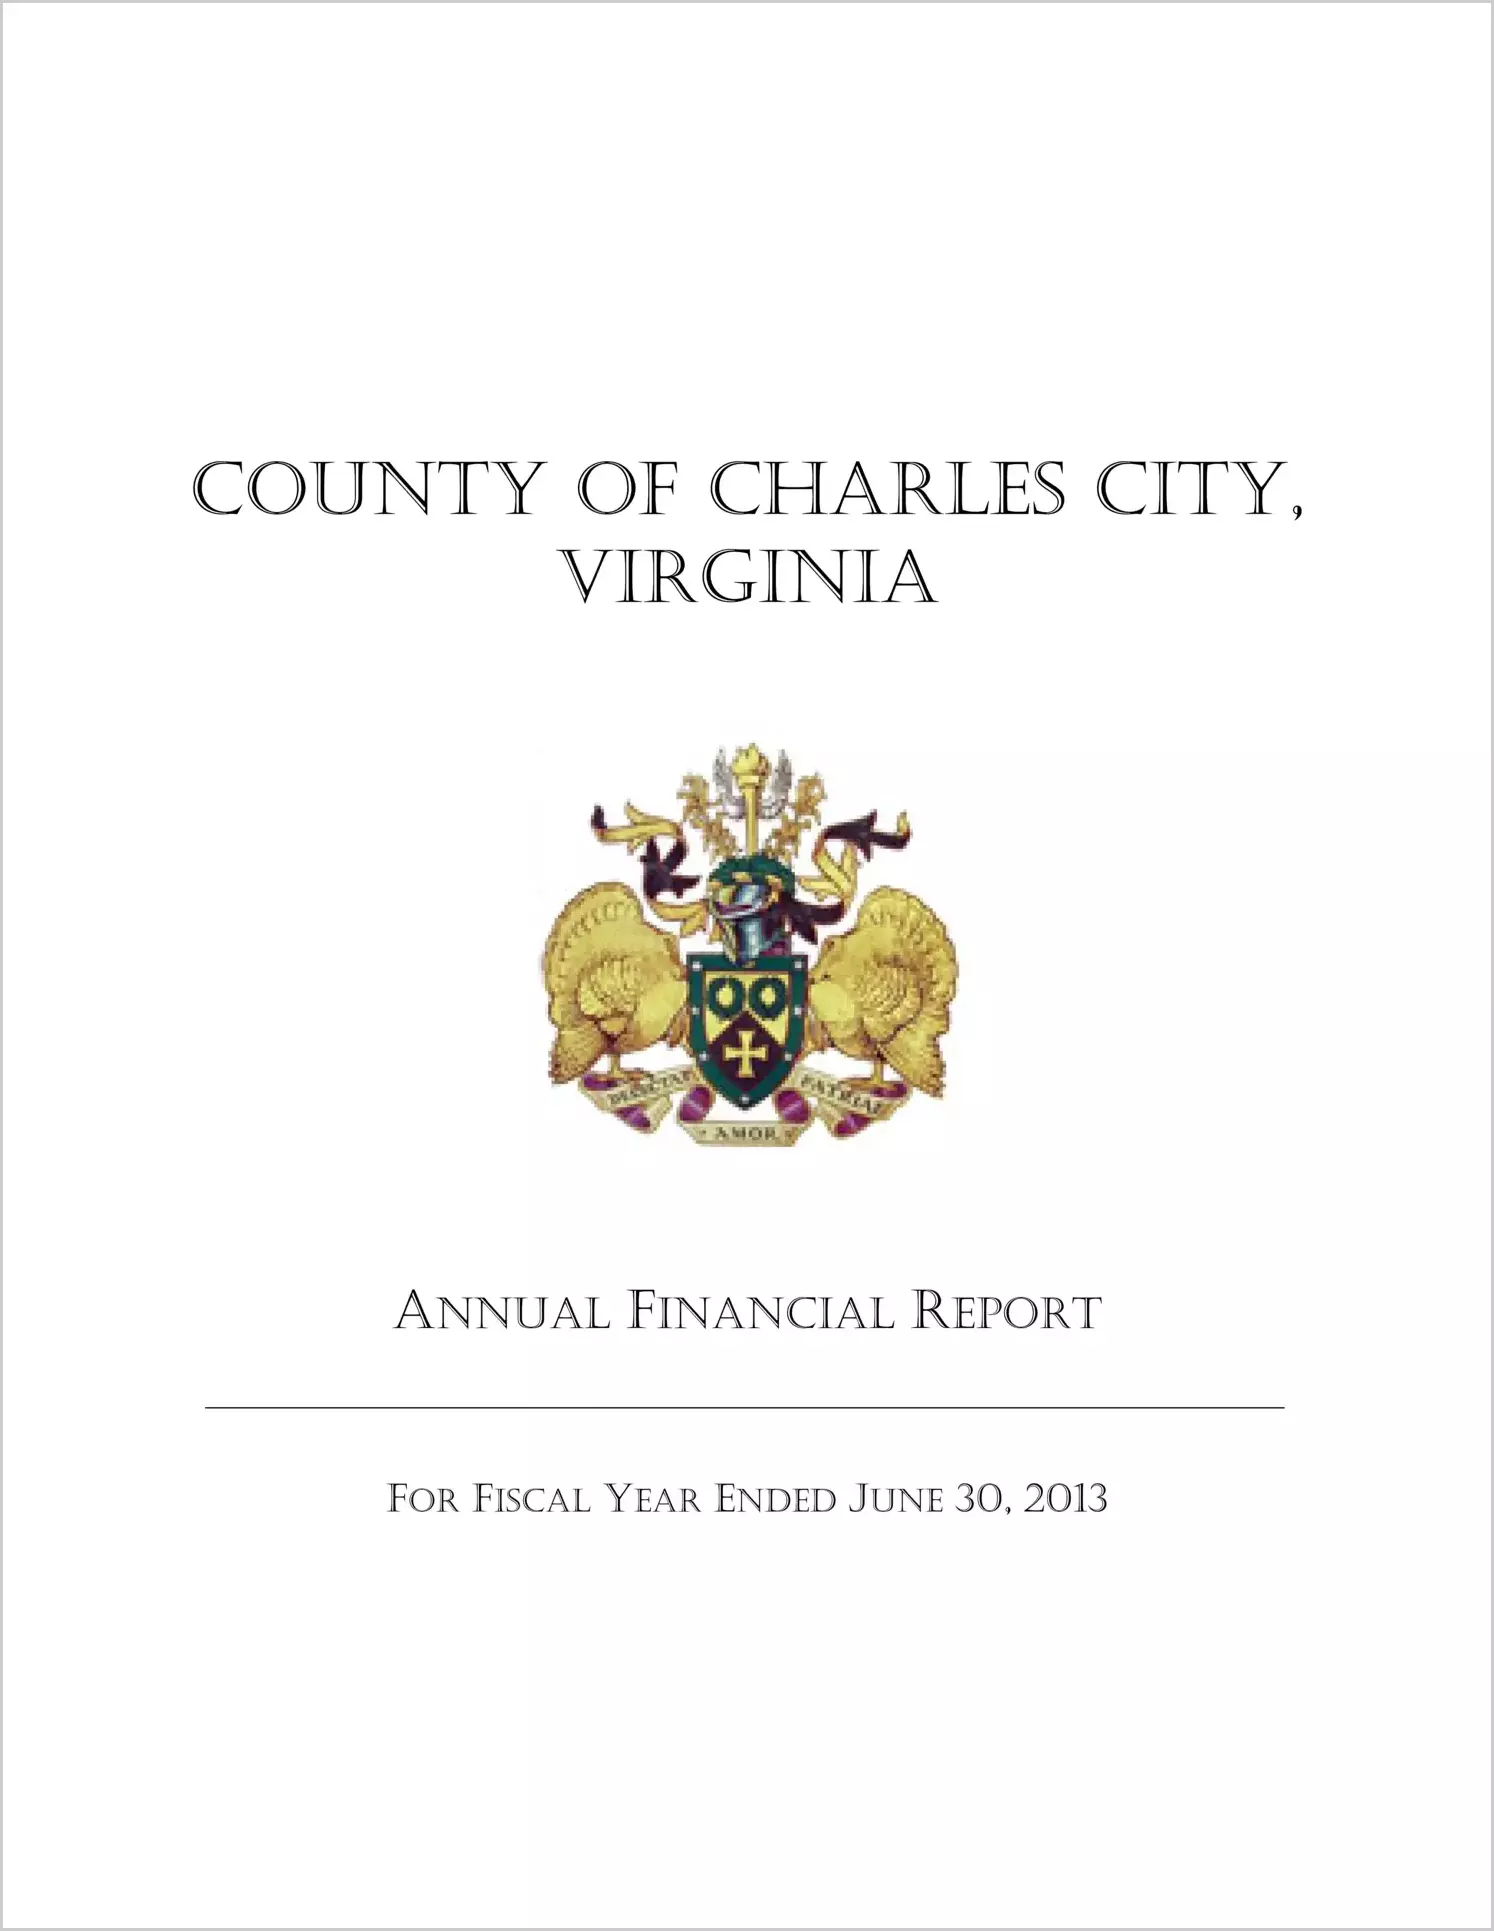 2013 Annual Financial Report for County of Charles City